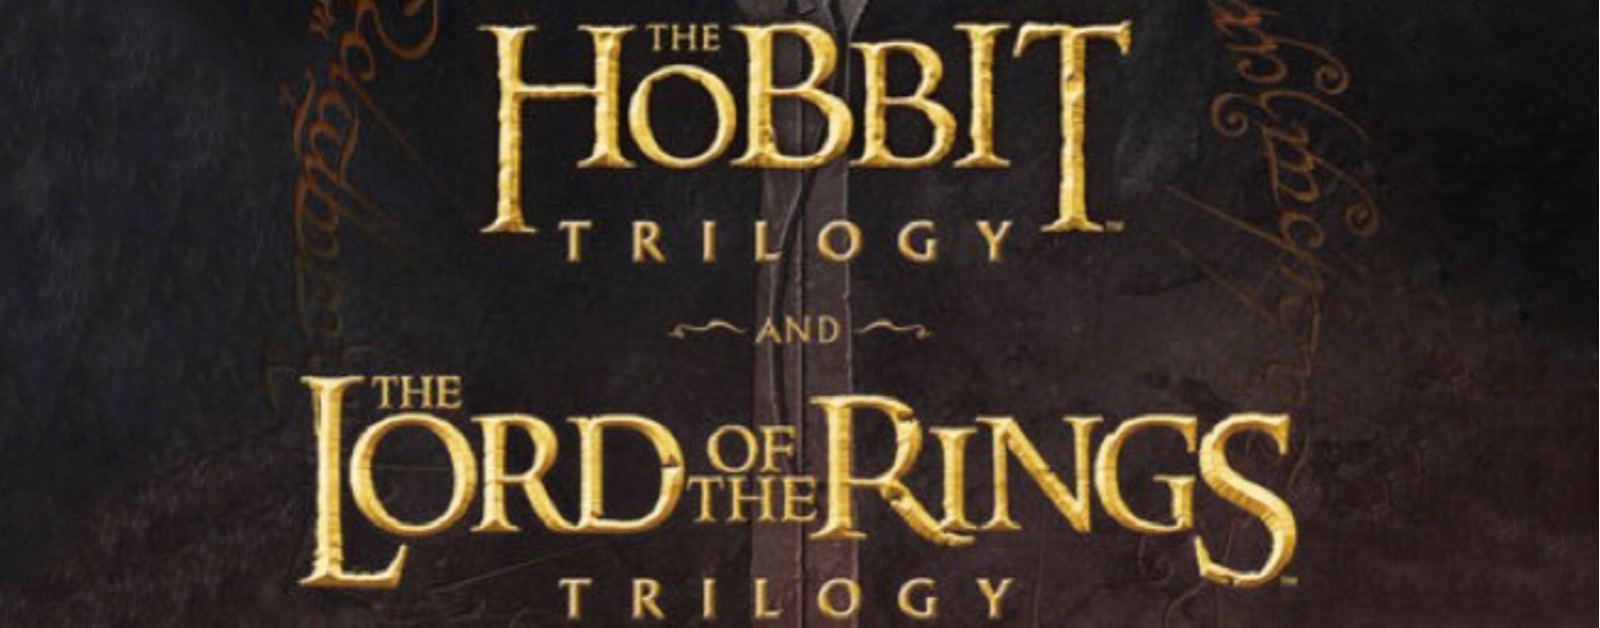 iTunes Deal: $40 for Middle Earth 6-Movie Bundle